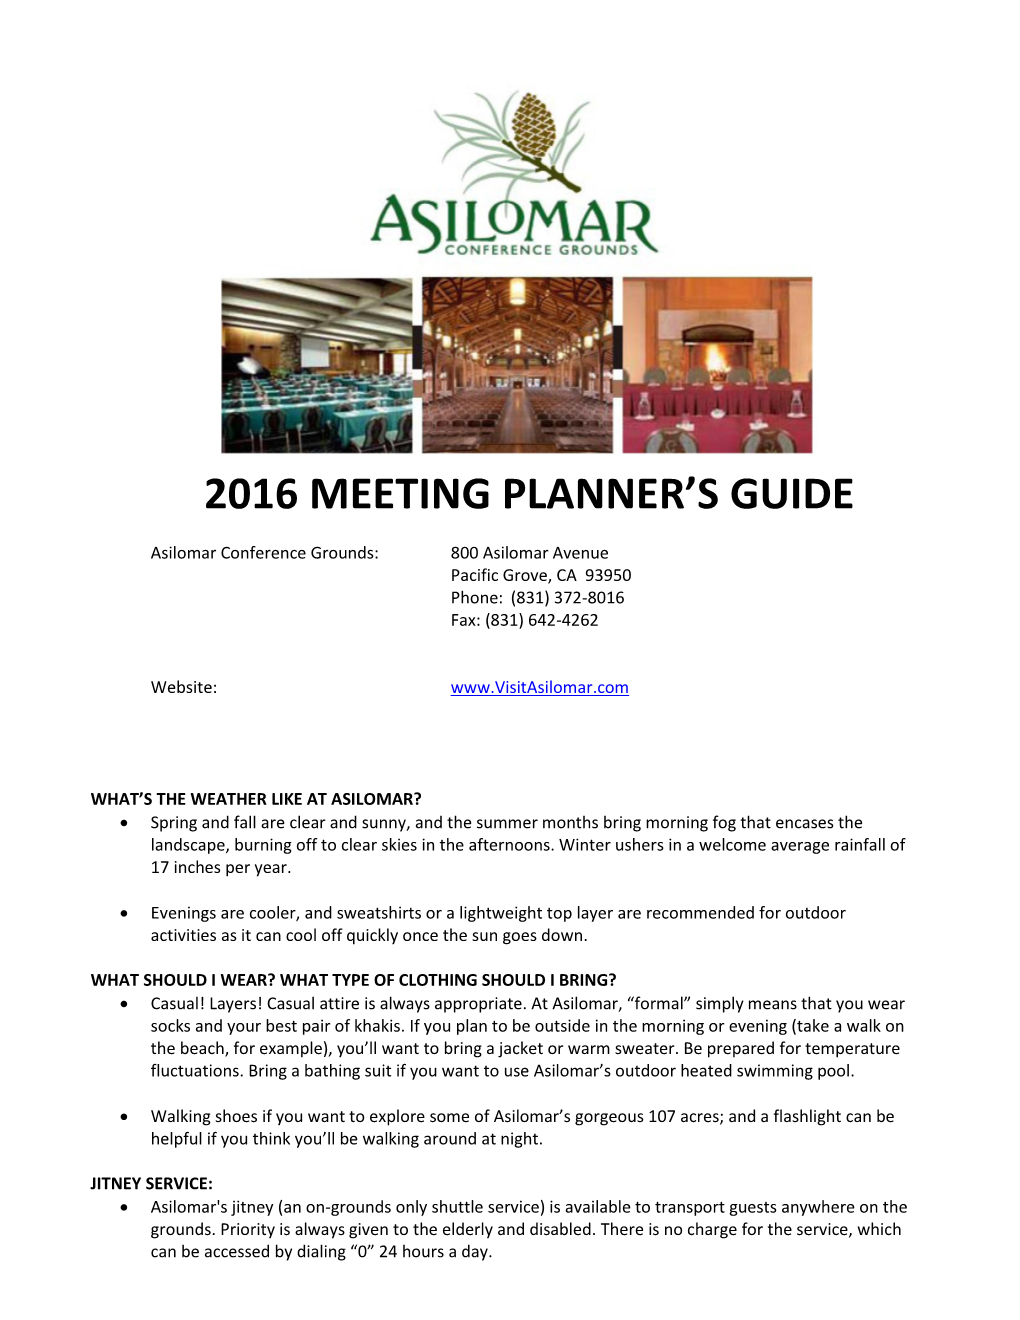 2016 Meeting Planner's Guide